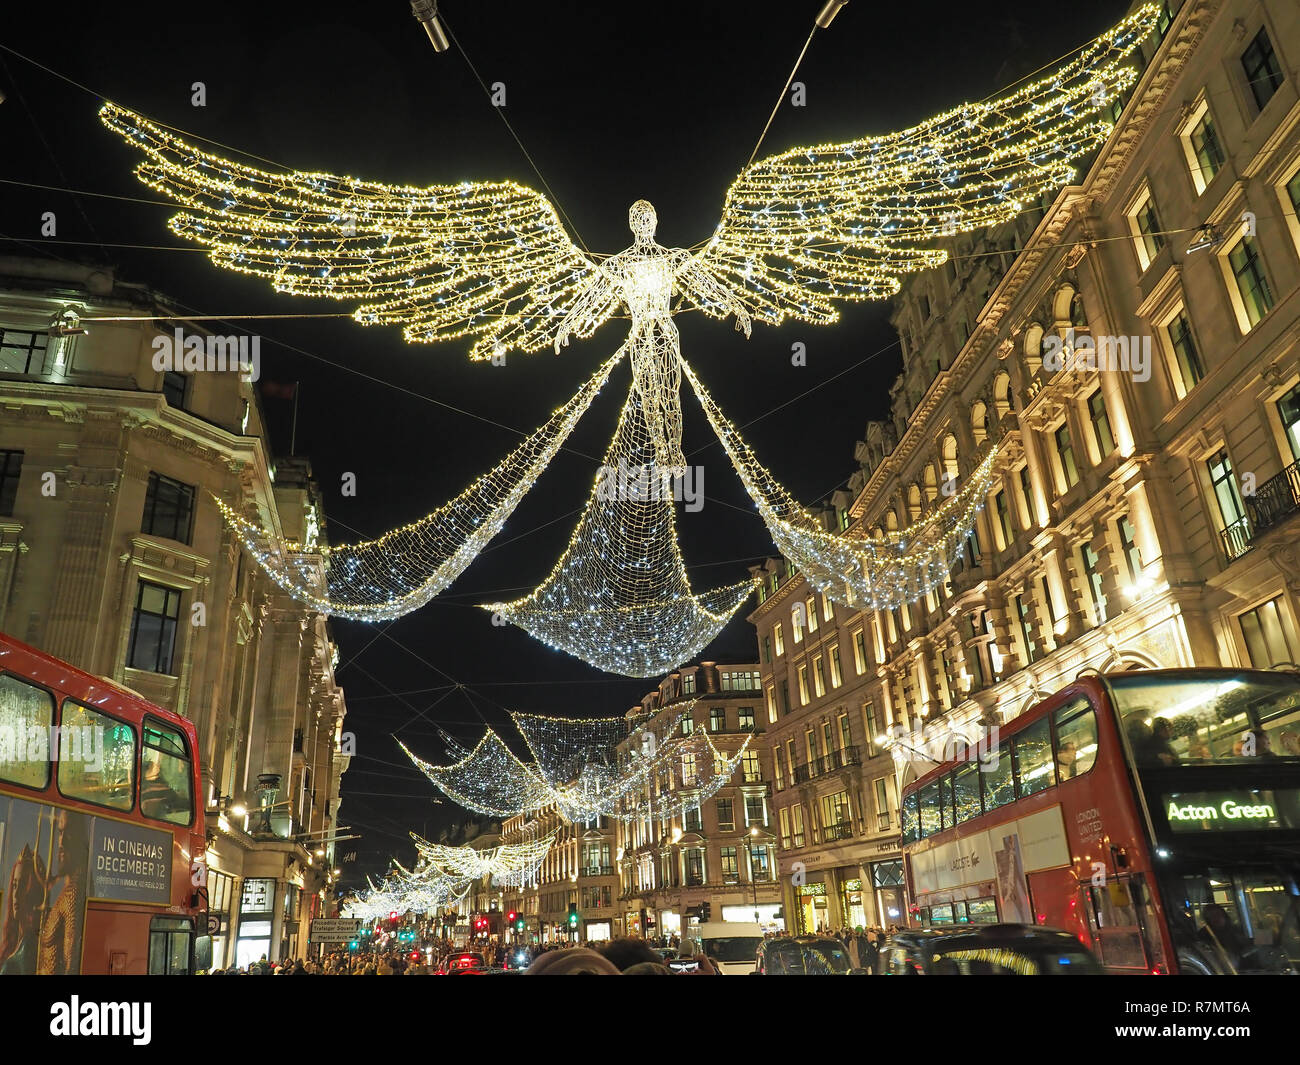 View looking up at the festive Christmas decorations at night in Regent Street London 2018 Stock Photo